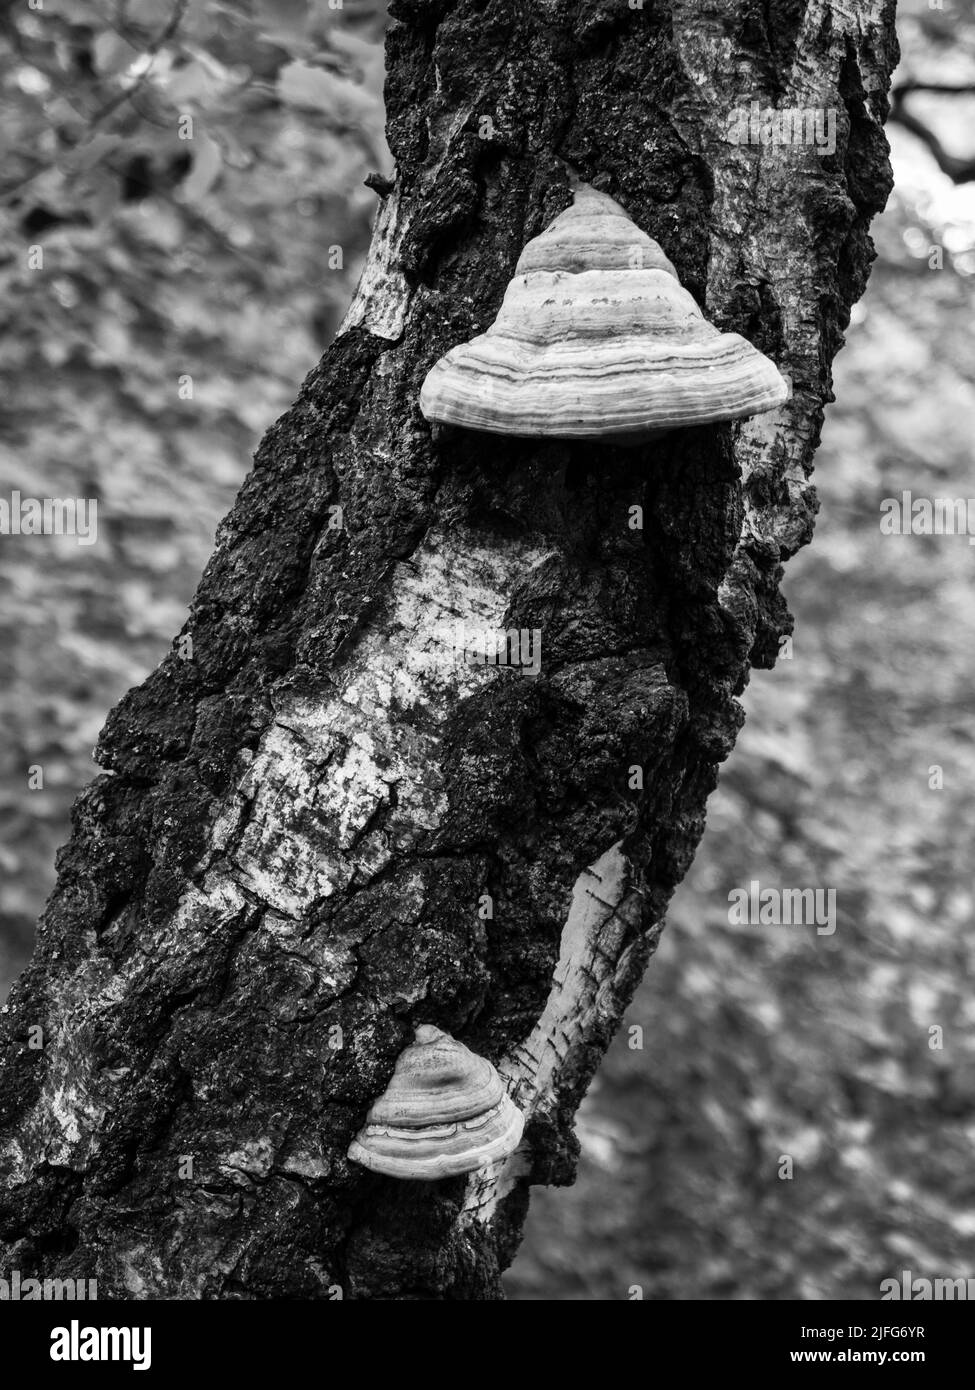 Fungus on Birch Tree Trunk Detail with Bark Texture in Monochrome Black and White near Karlovy Vary, Czech Republic Stock Photo